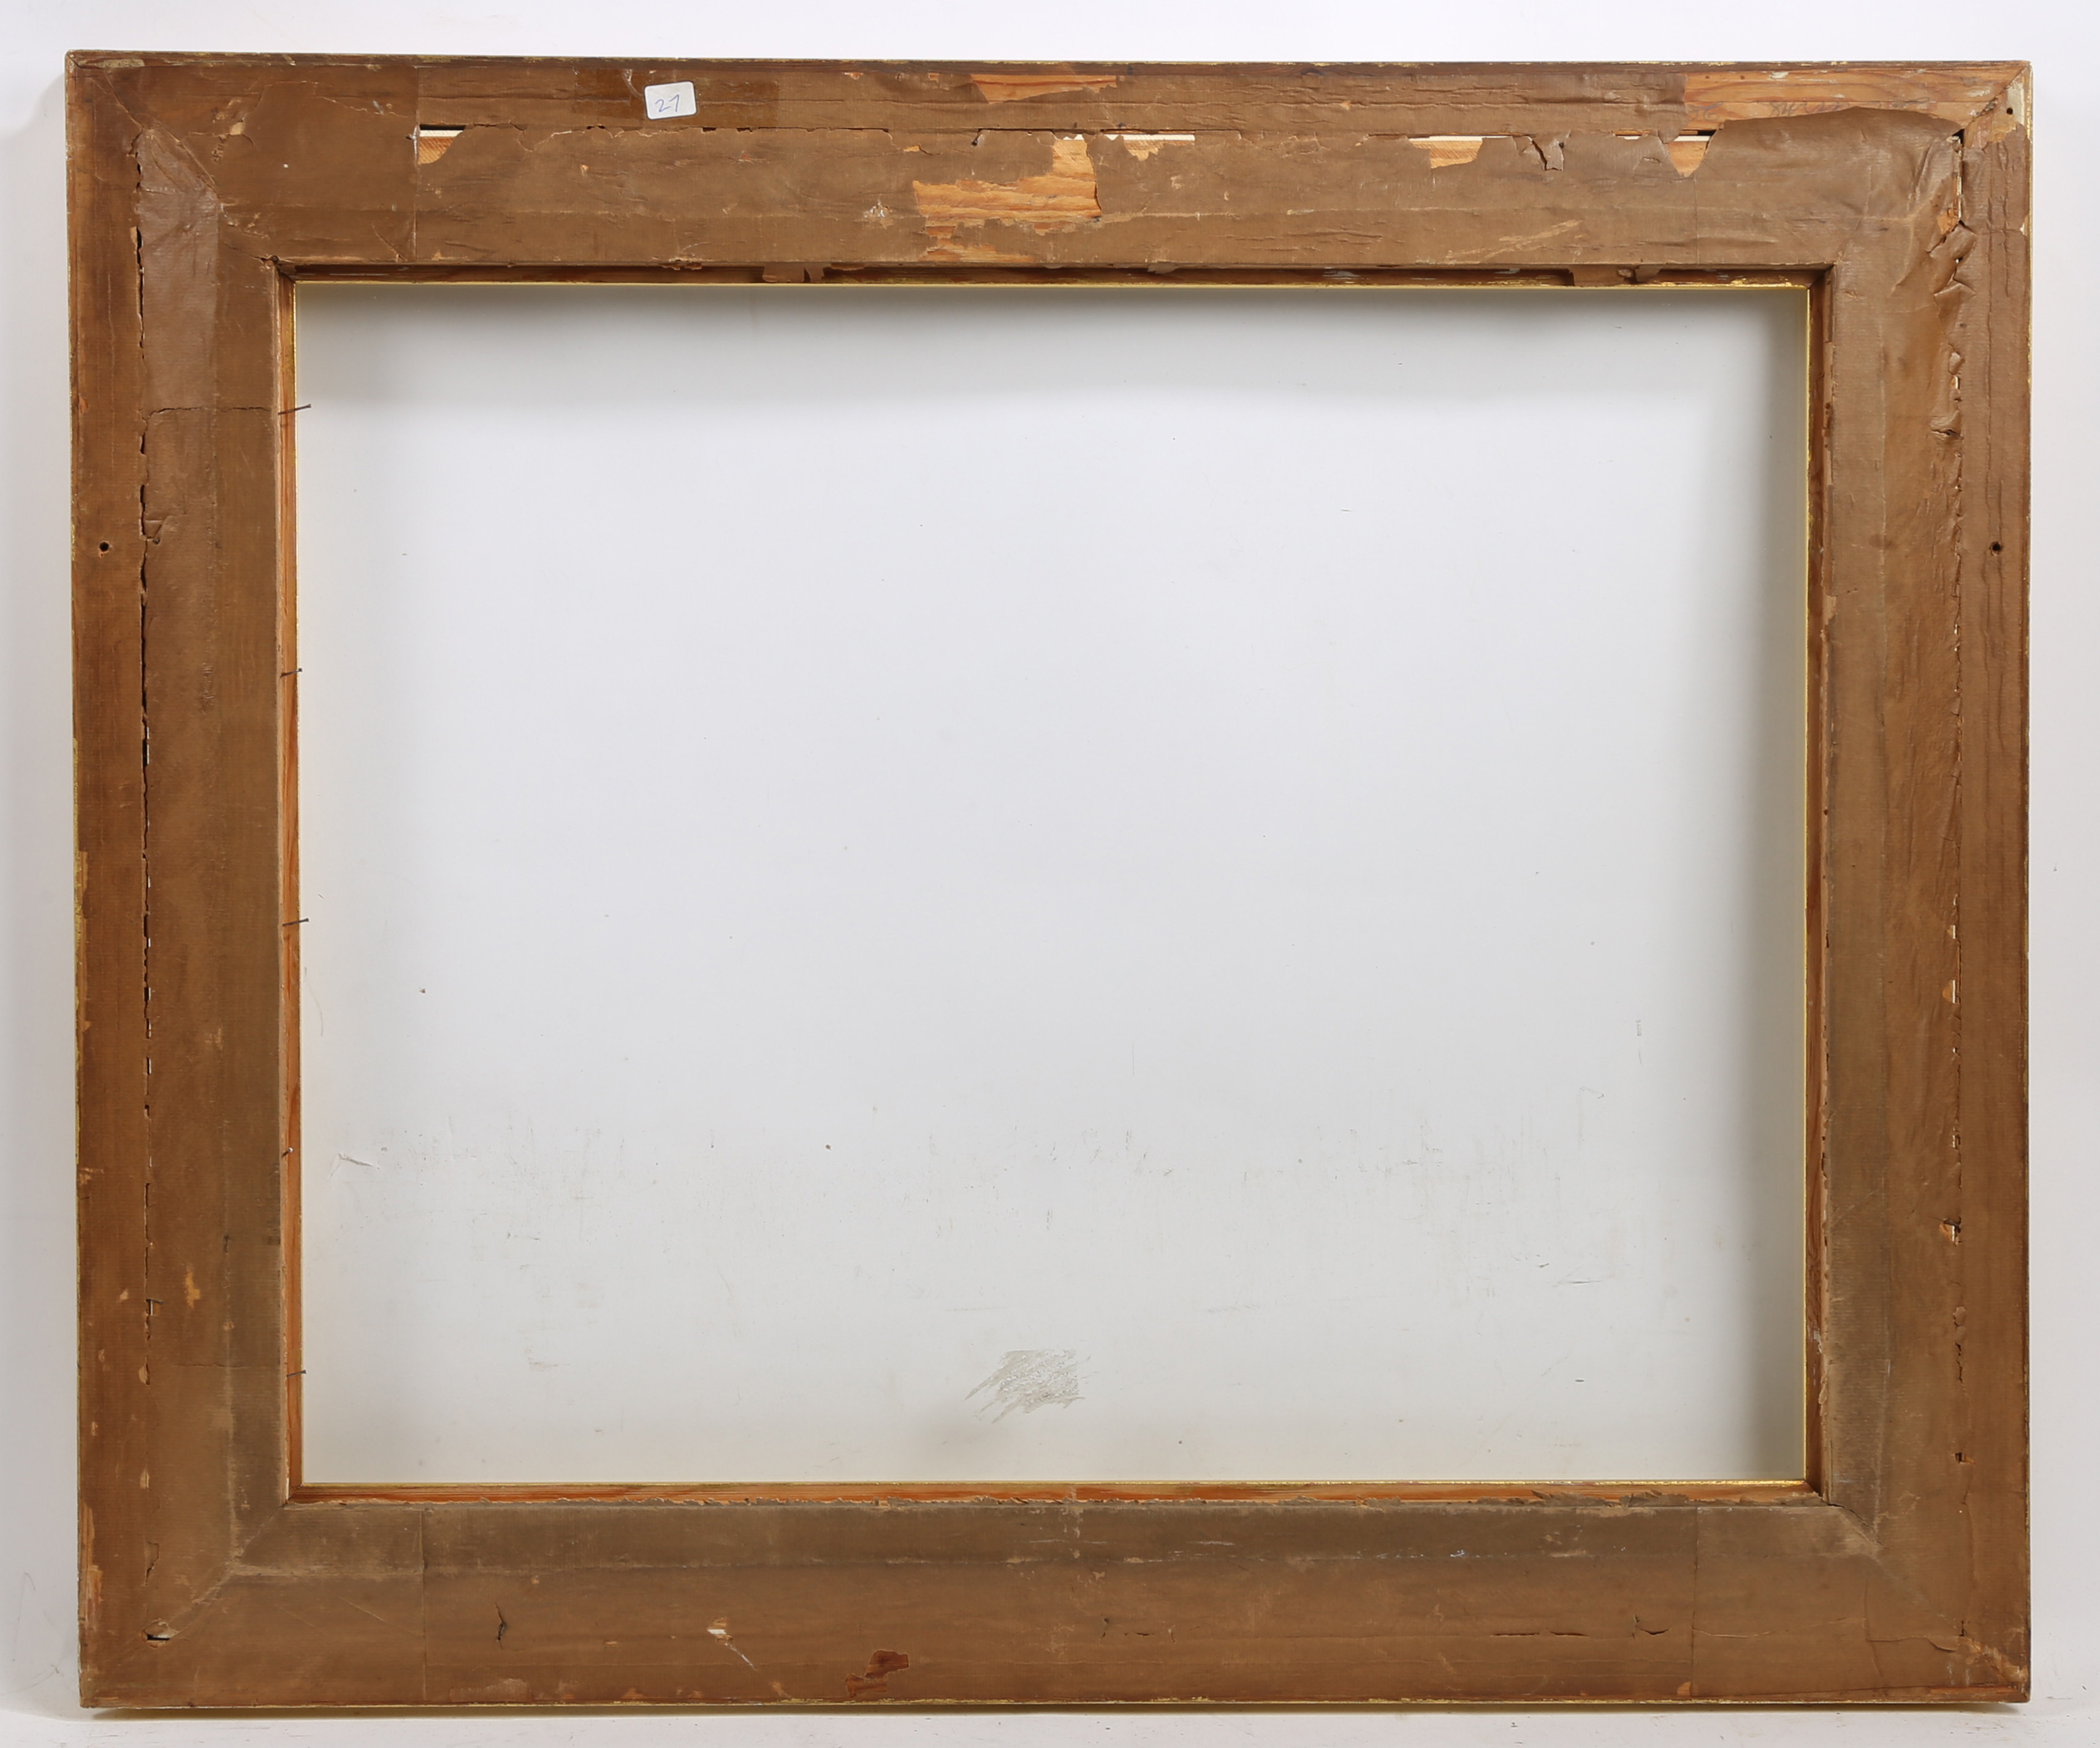 19th century English swept watercolour frame with corners and centre - rebate size 24in x 19in - Image 2 of 3